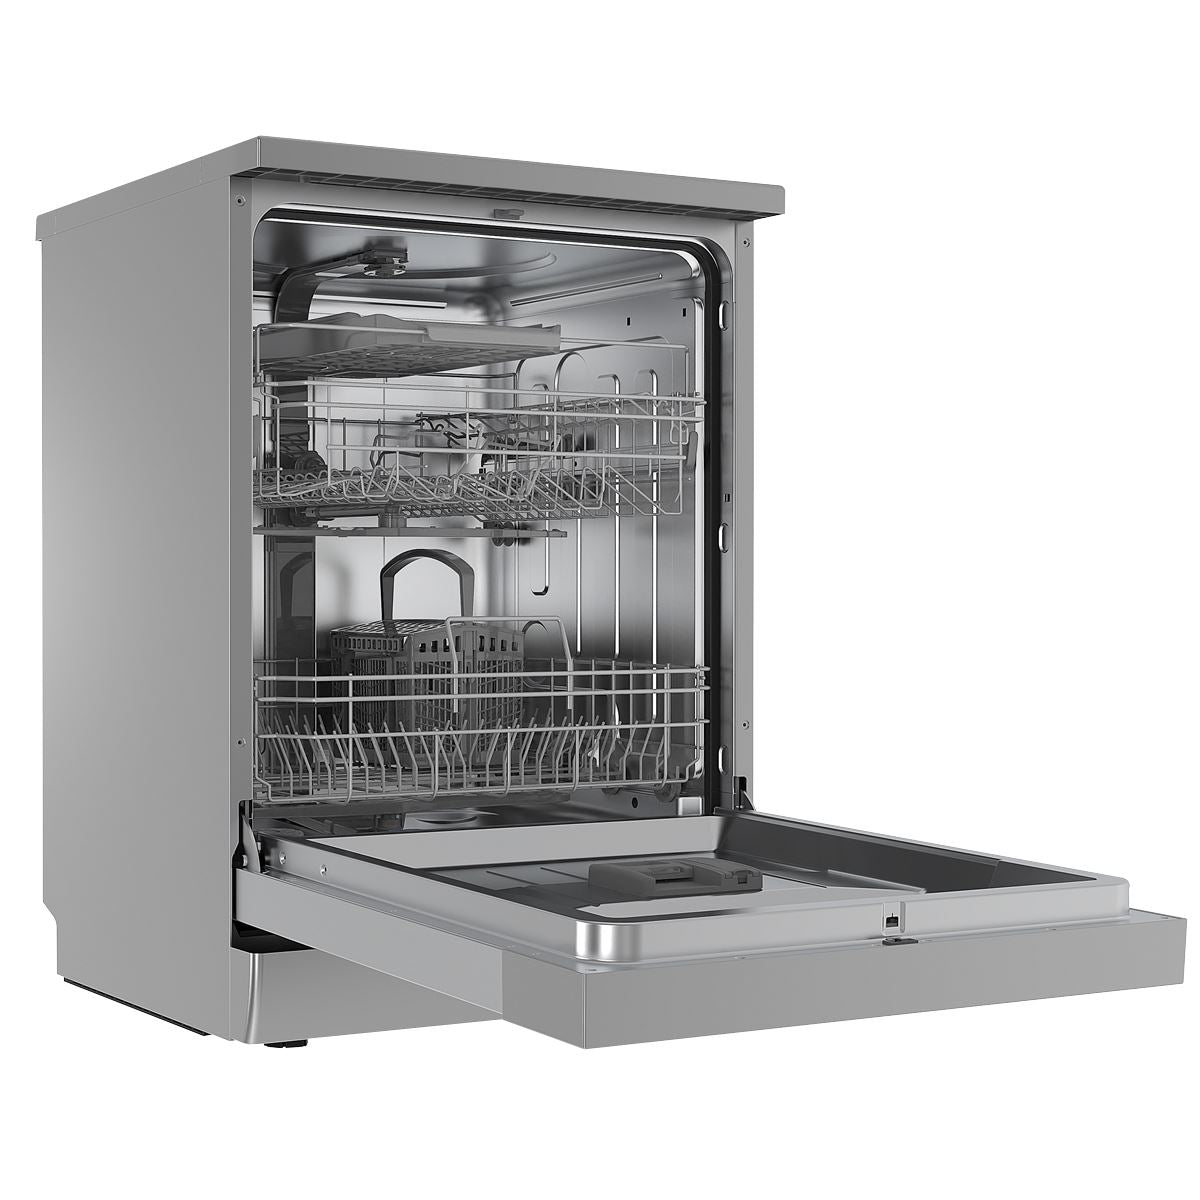 Baridi Freestanding Dishwasher, Full Size, Standard 60cm Wide with 14 Place Settings, 8 Programs & 5 Functions, LED Display, Silver